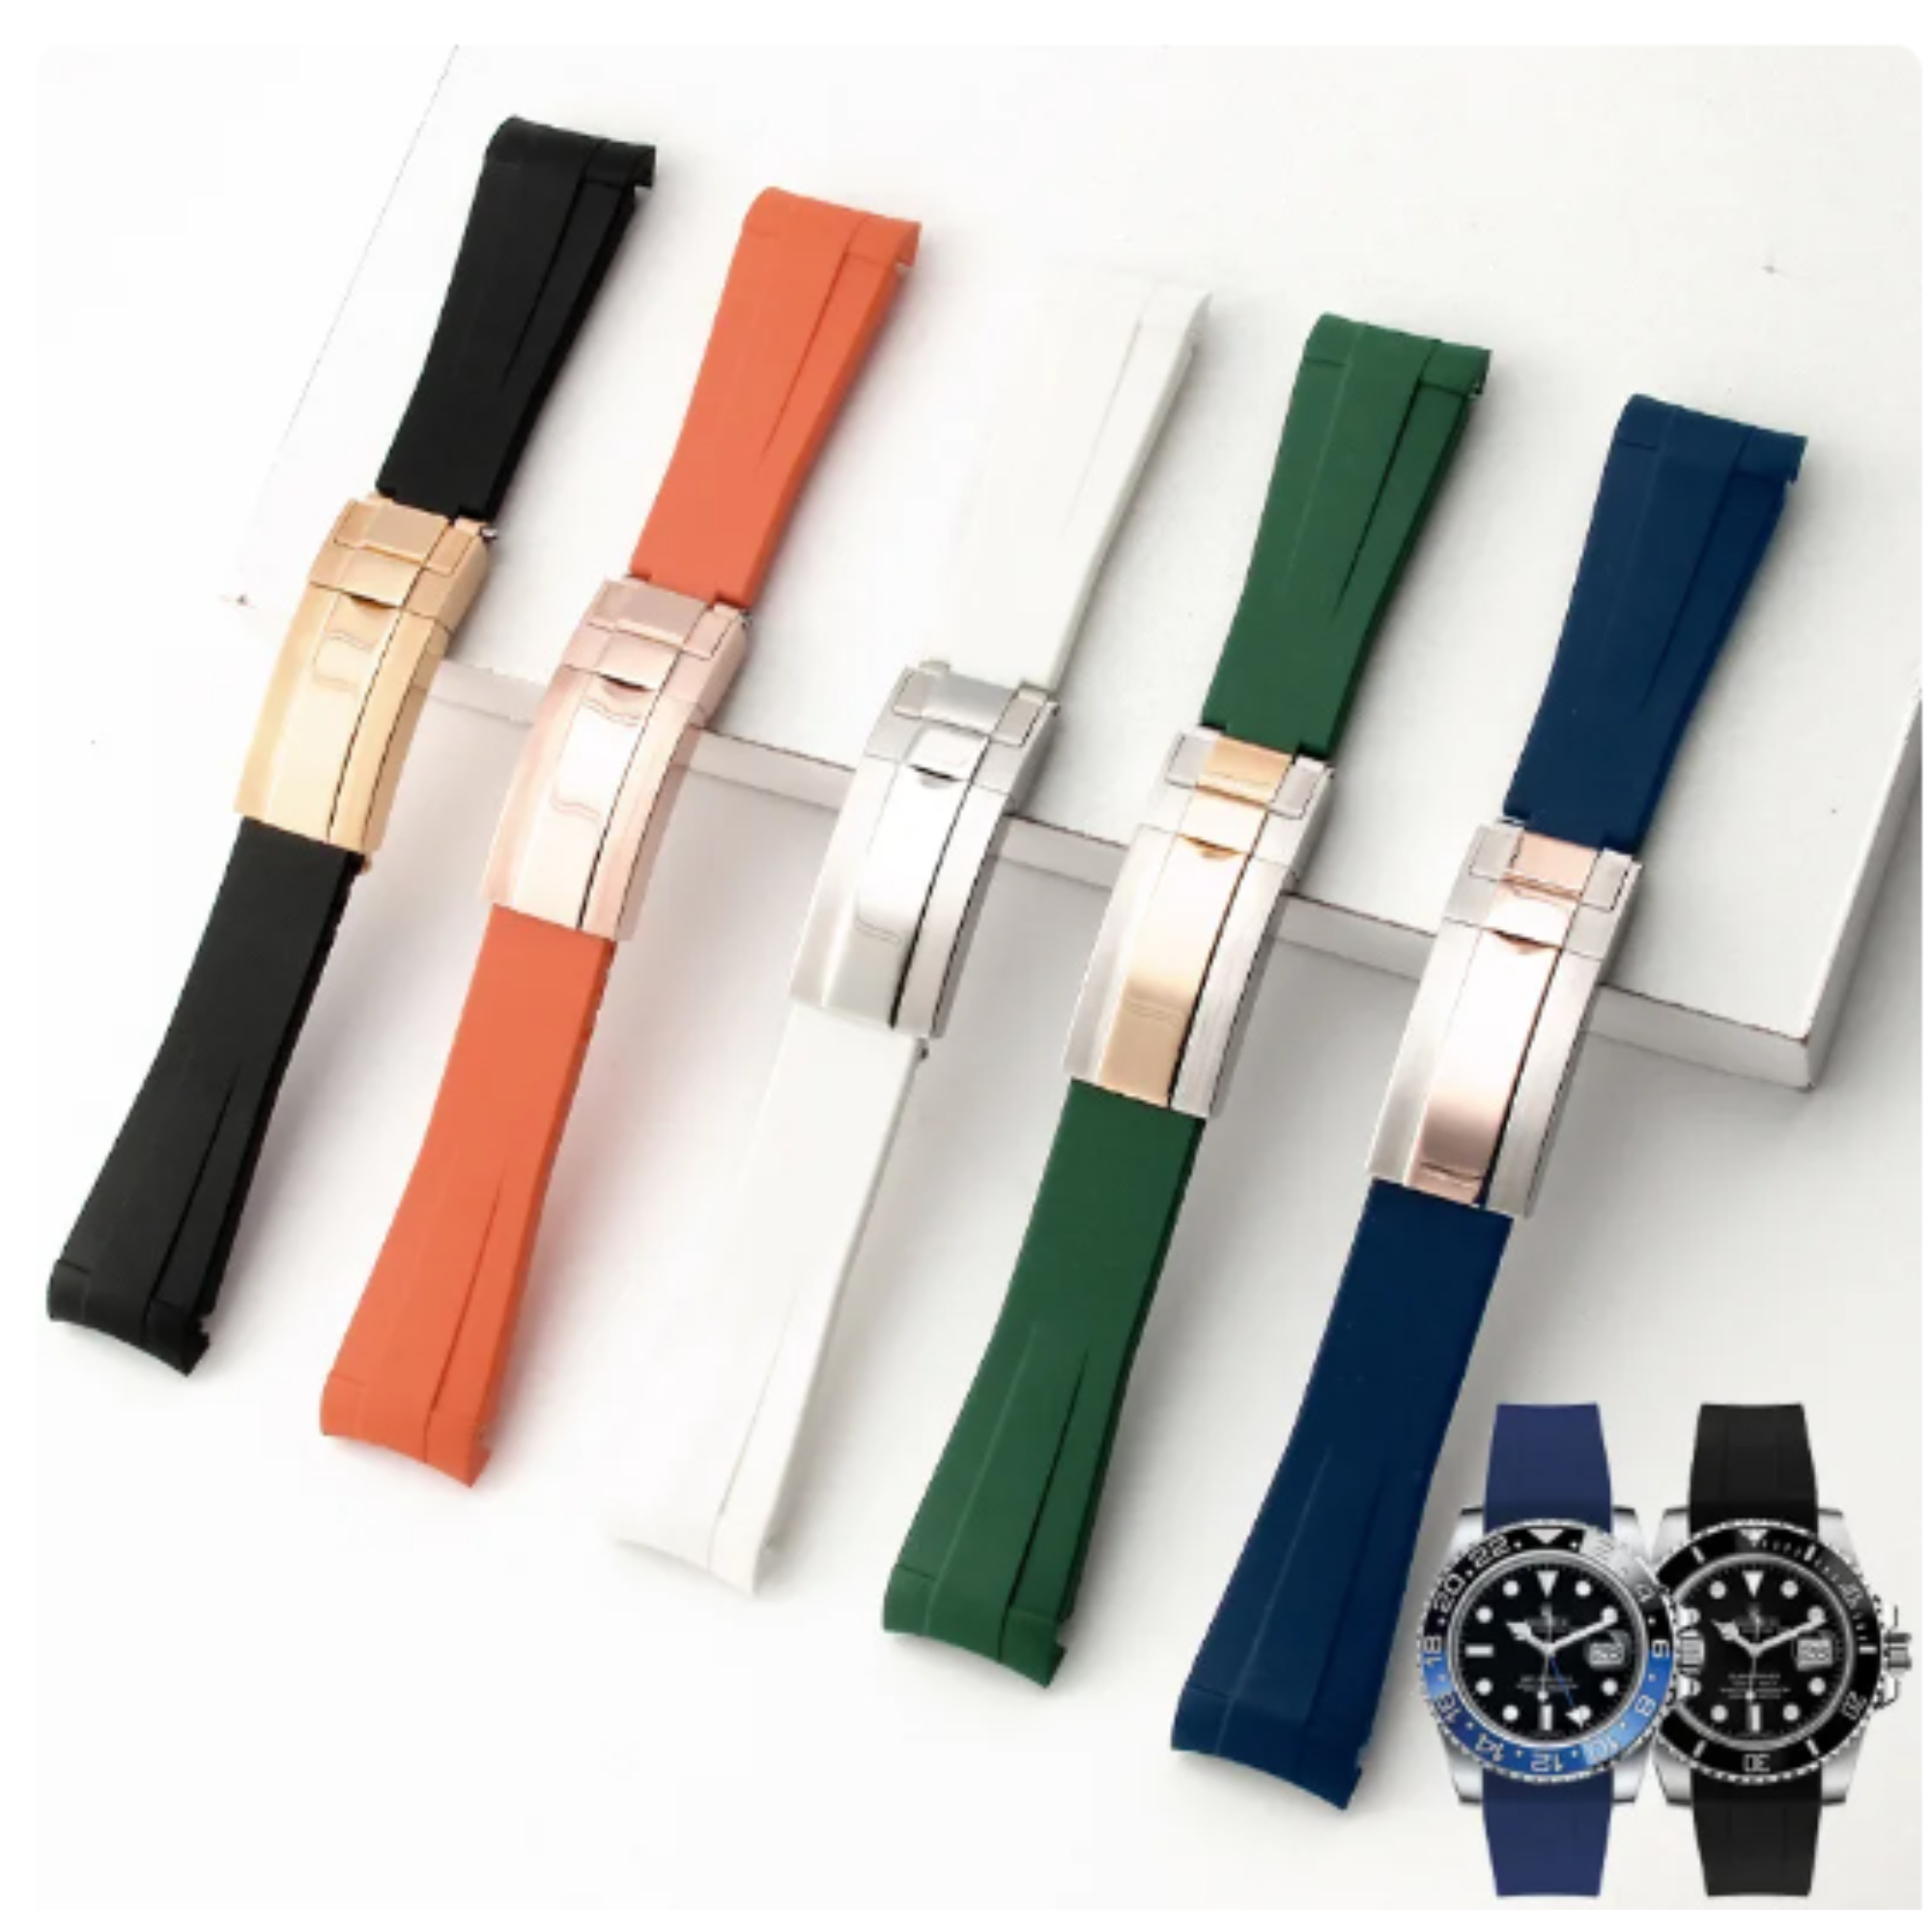 High End Curved FKM Rubber Watch Band with Oyster Style Deployment Clasp: 20 mm - Green with Gold Dual tone